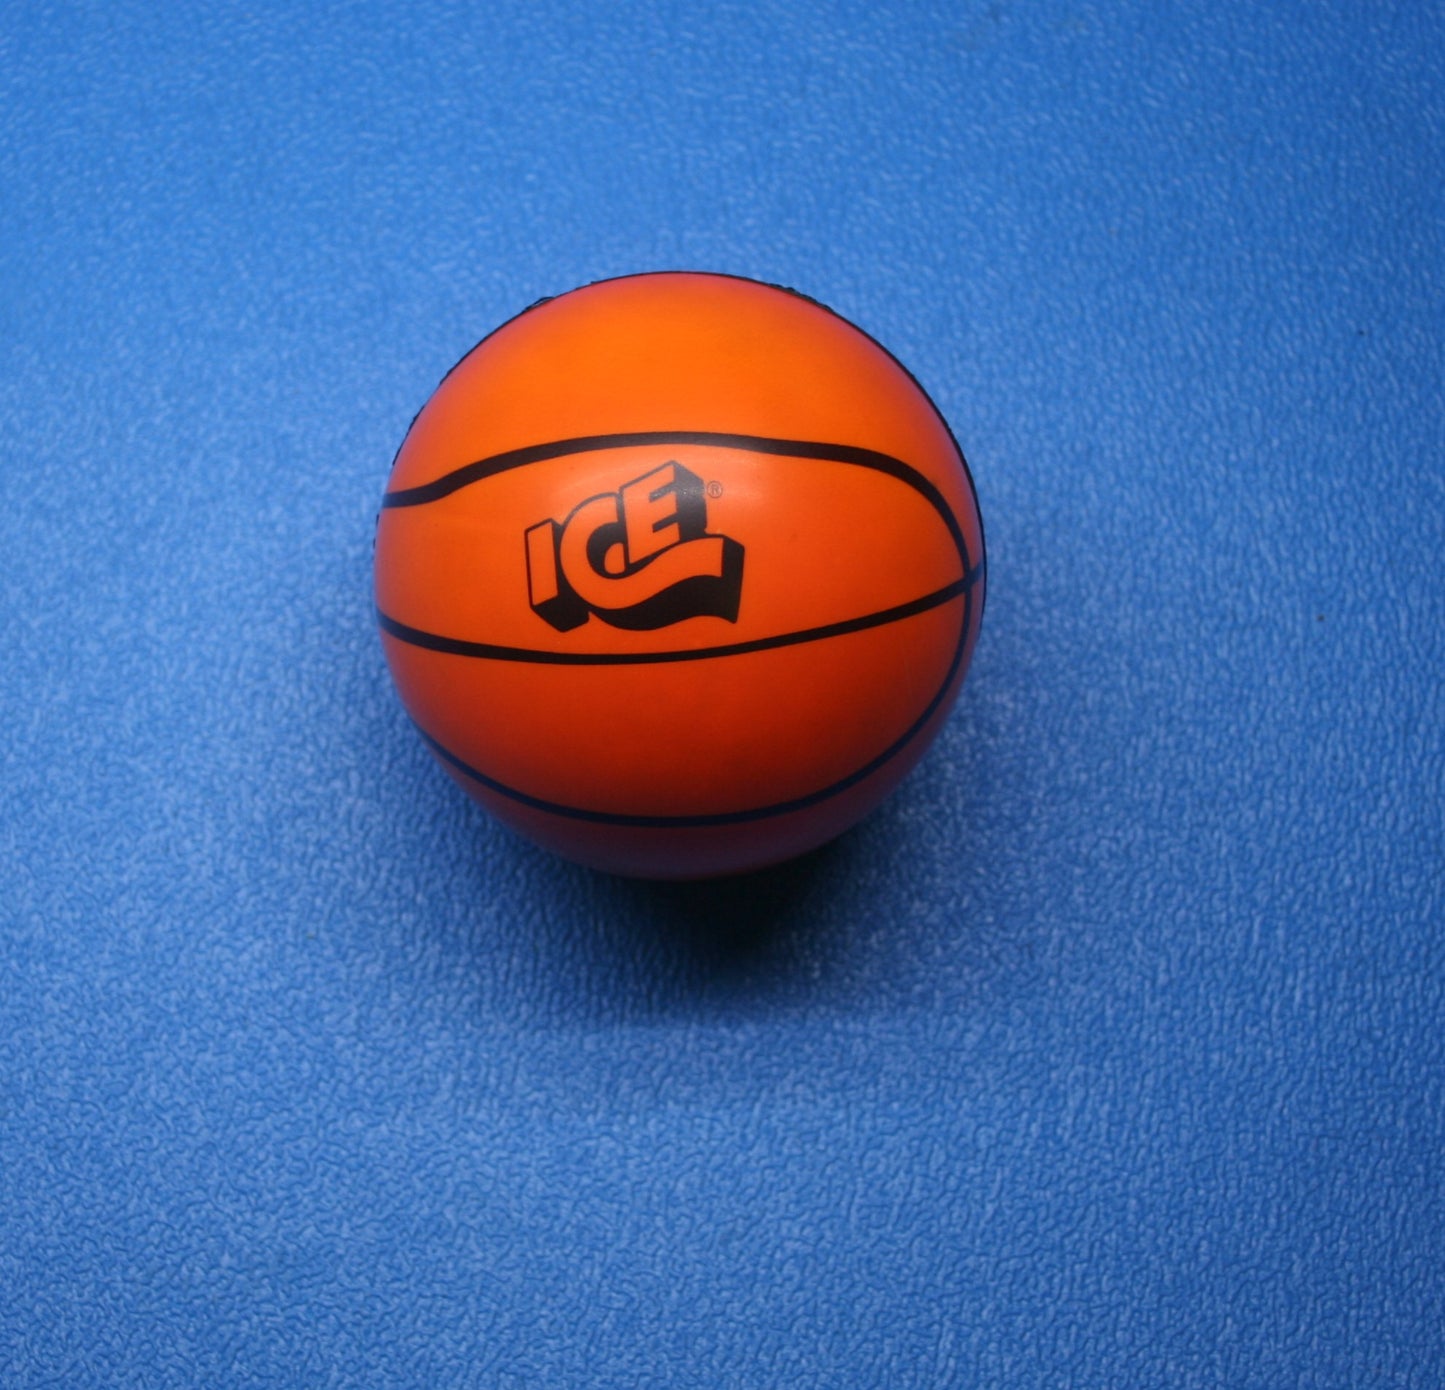 BASKETBALL 3.8" W/ I.C.E. LOGO [WH3024] for ICE game(s)